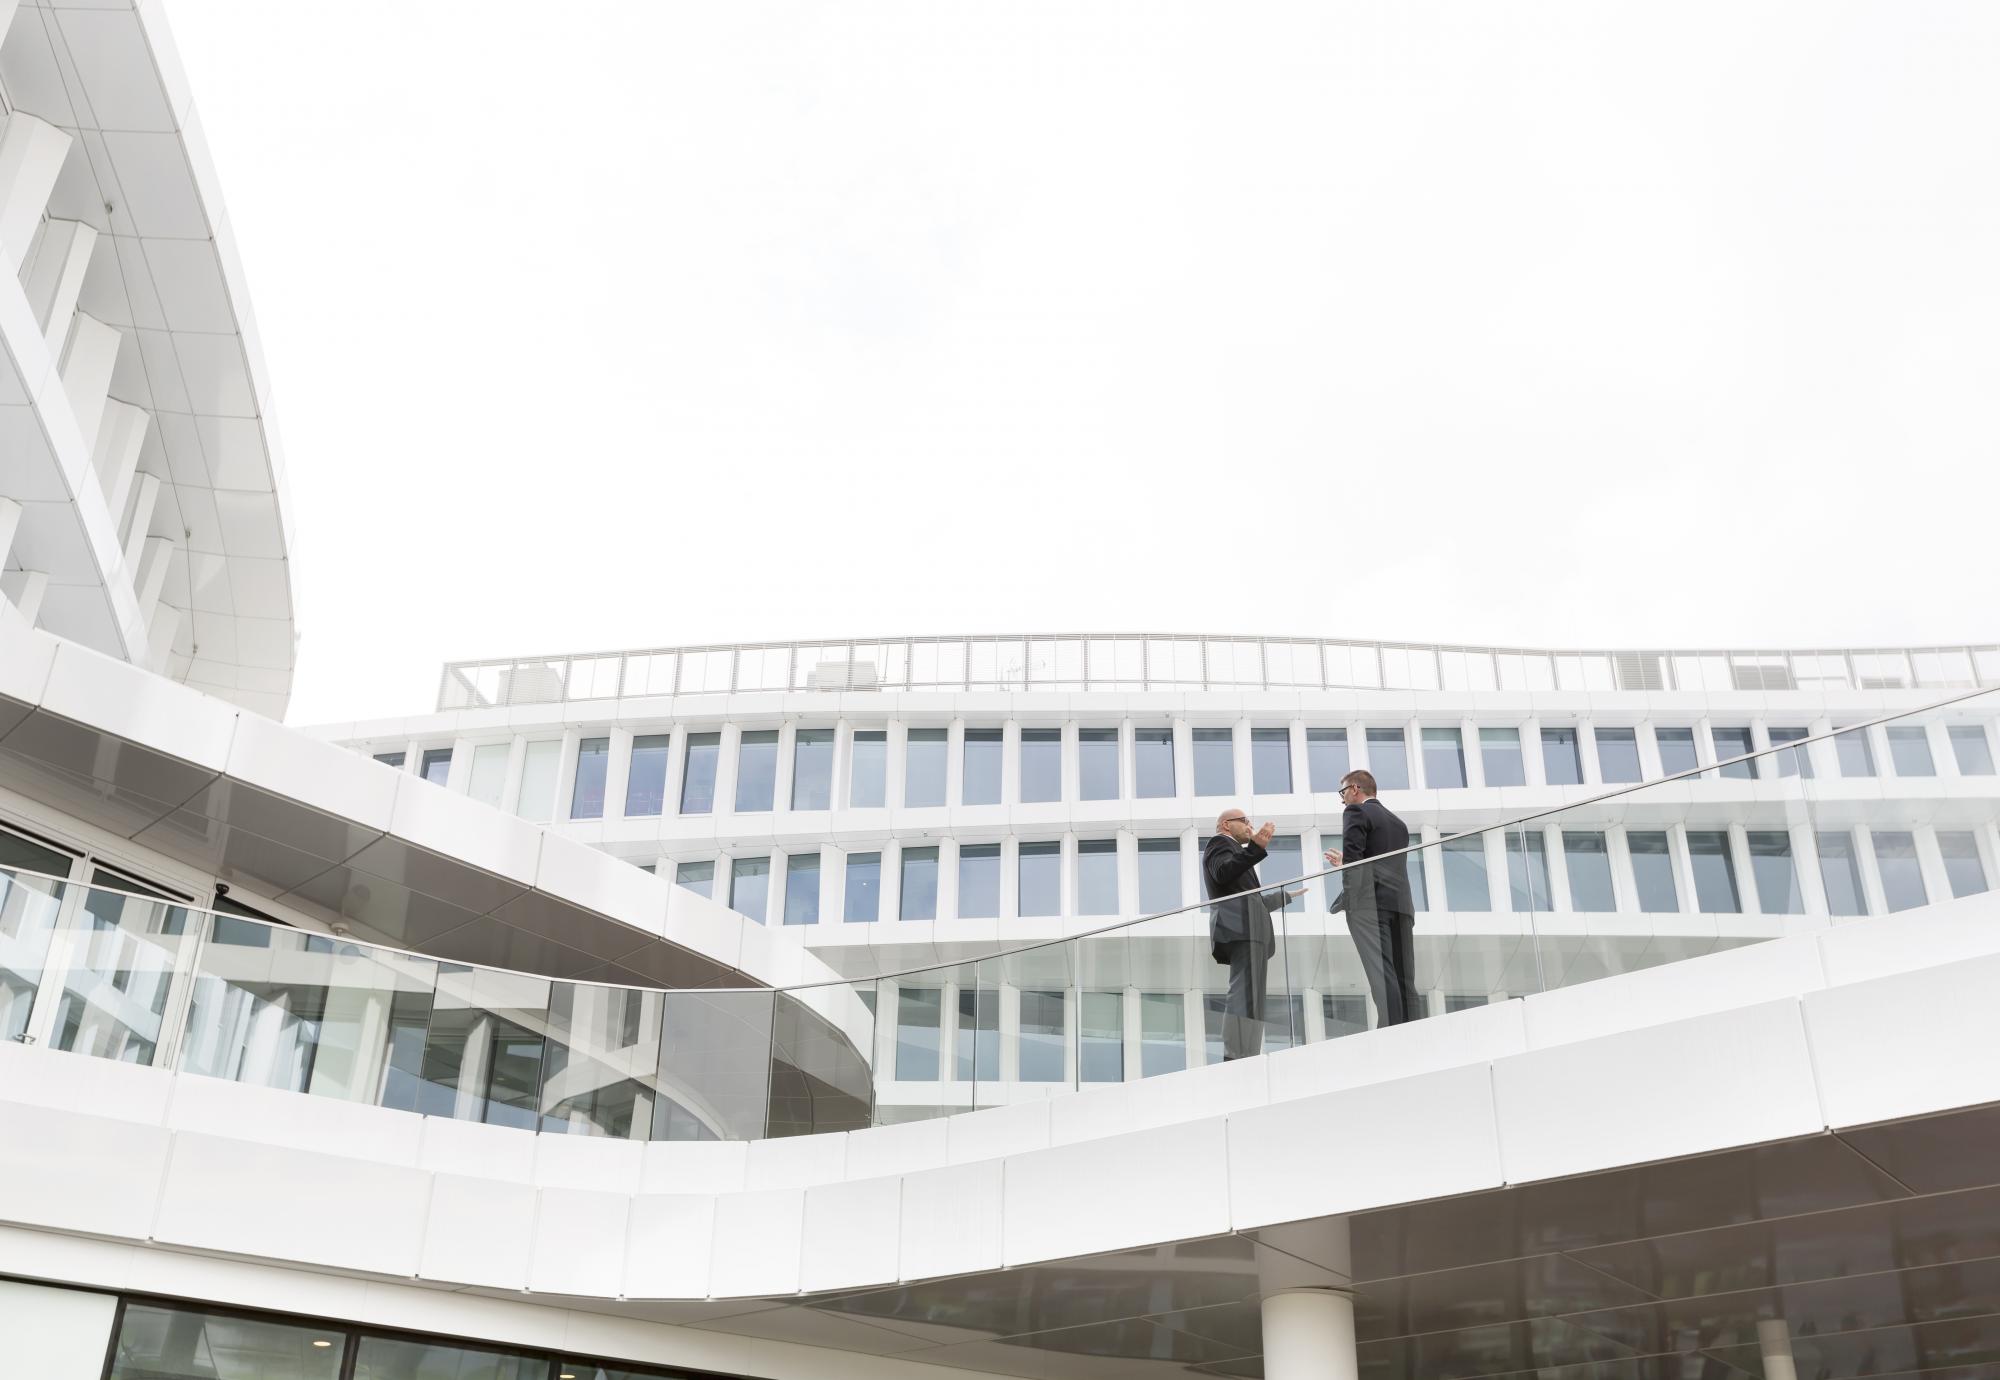 Two people stood outside a modern building